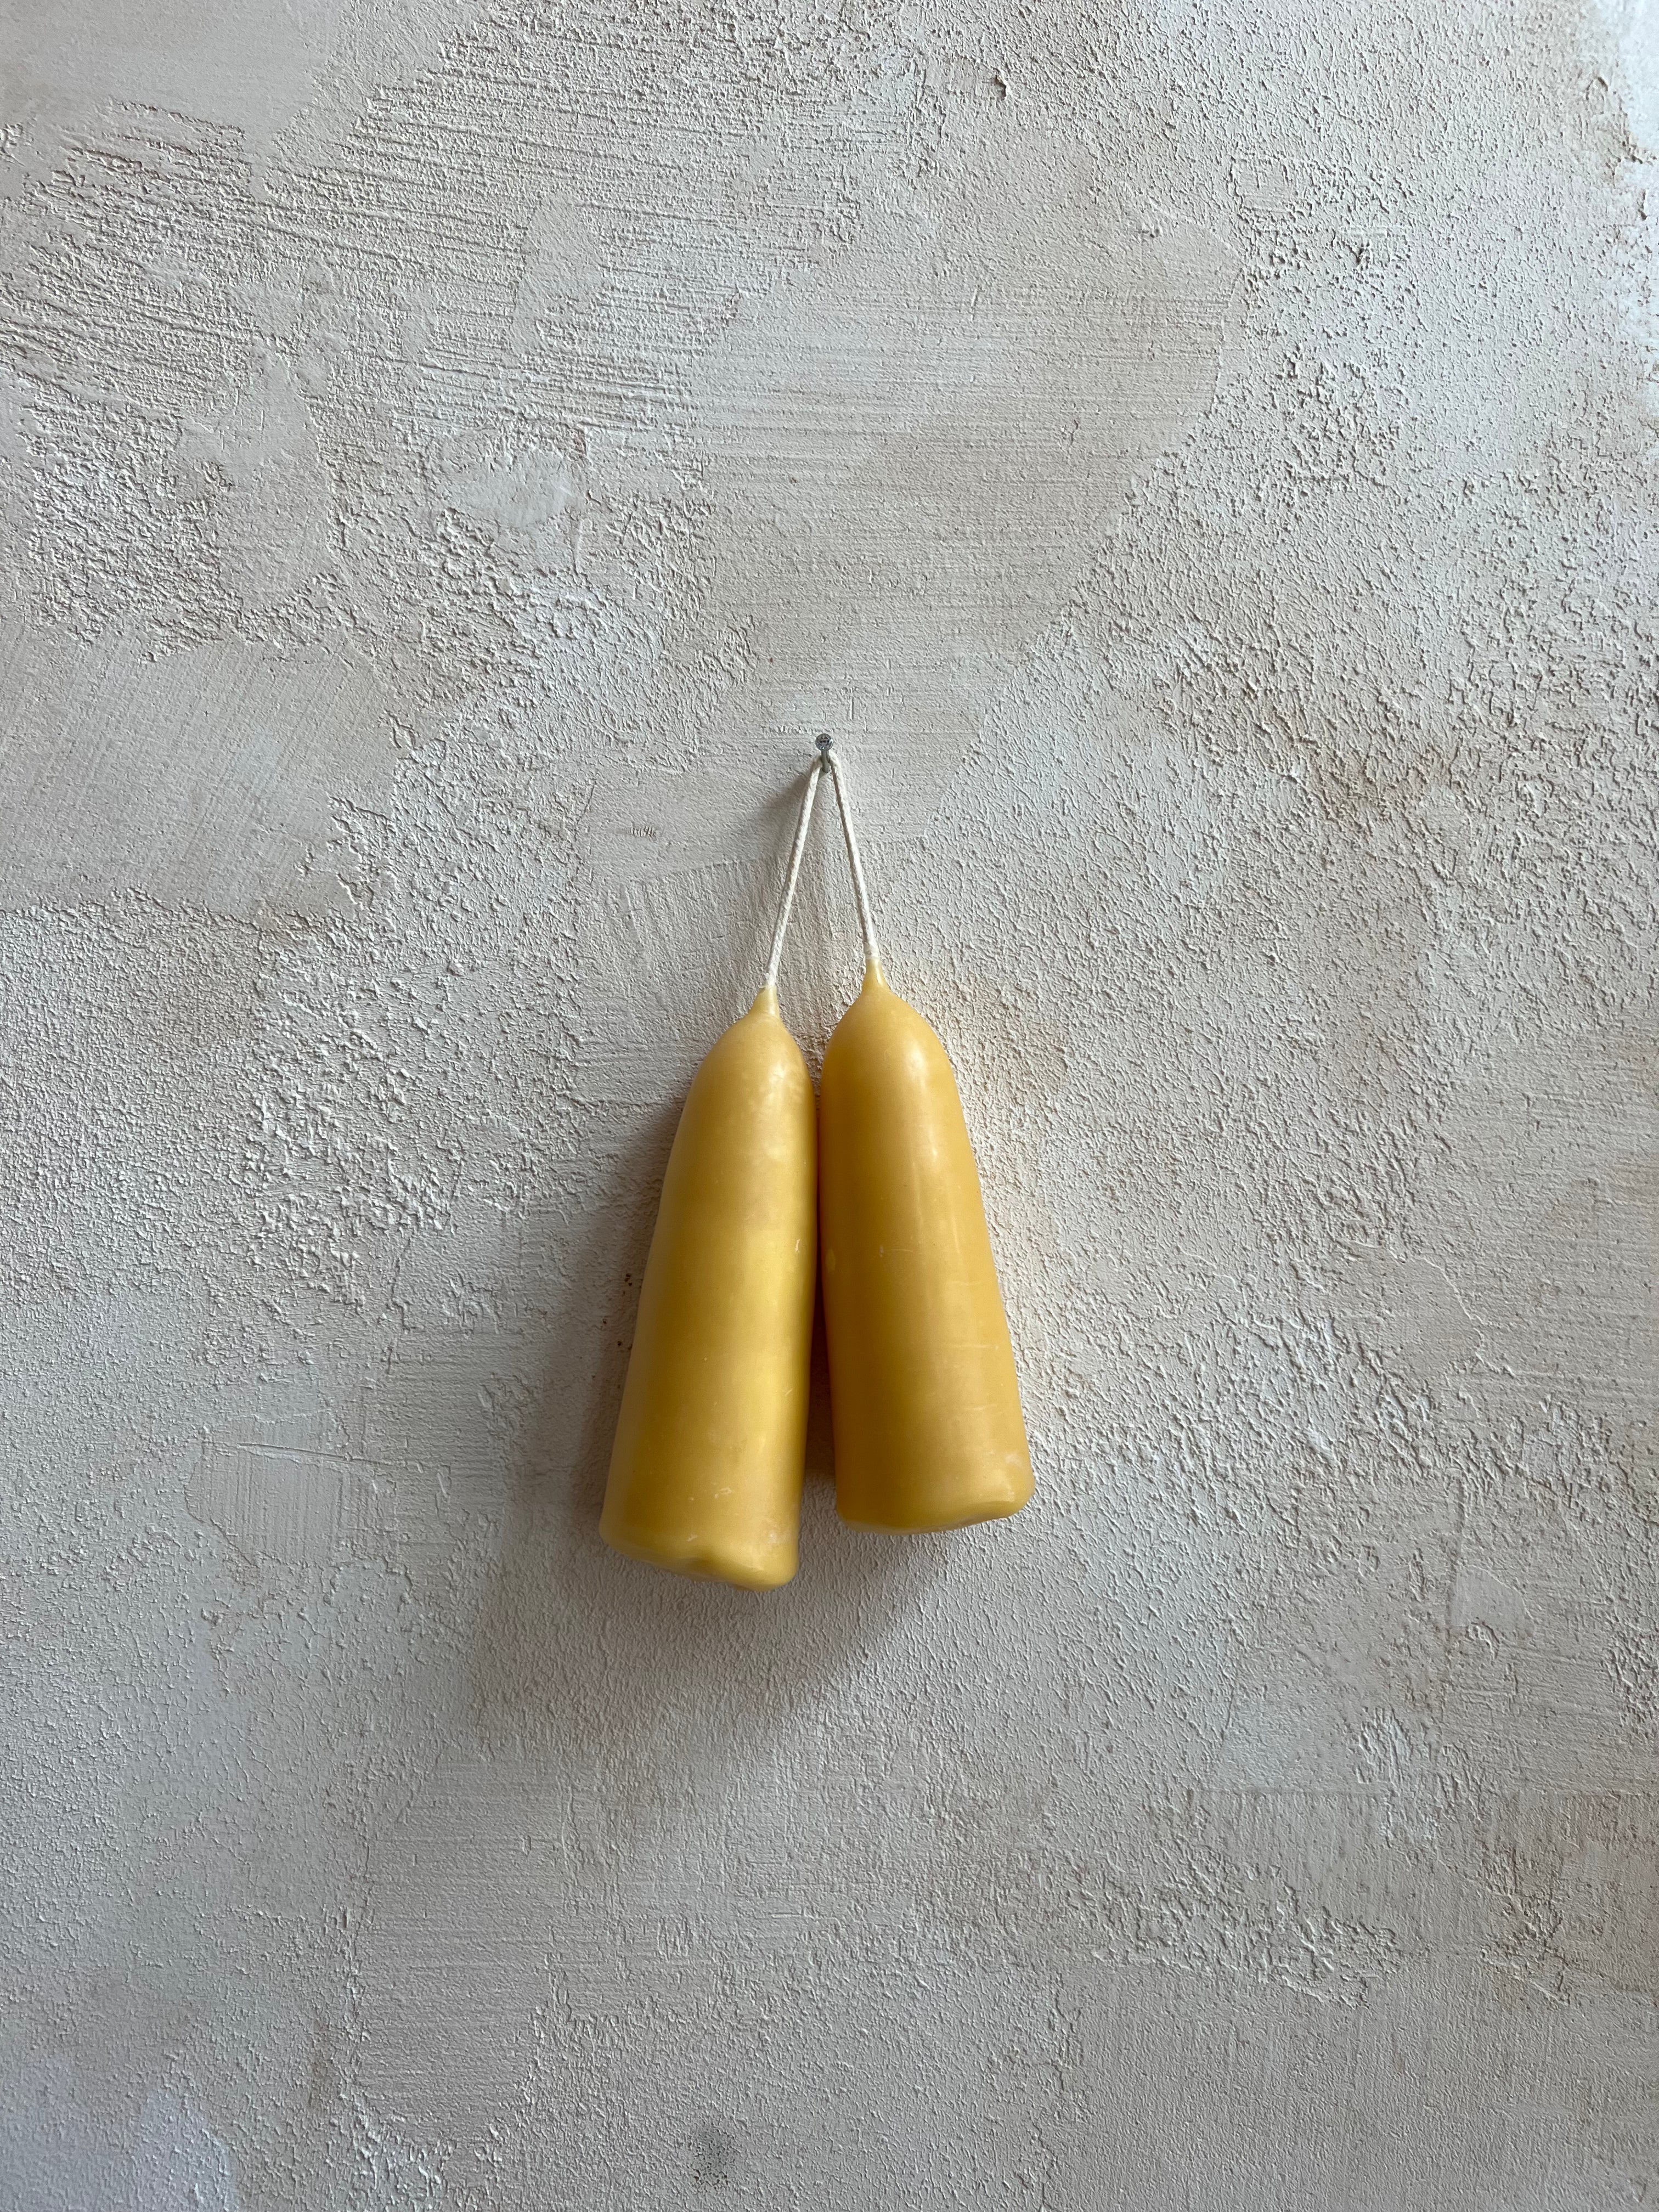 Stumpie Beeswax Tapers by Wick & Wax